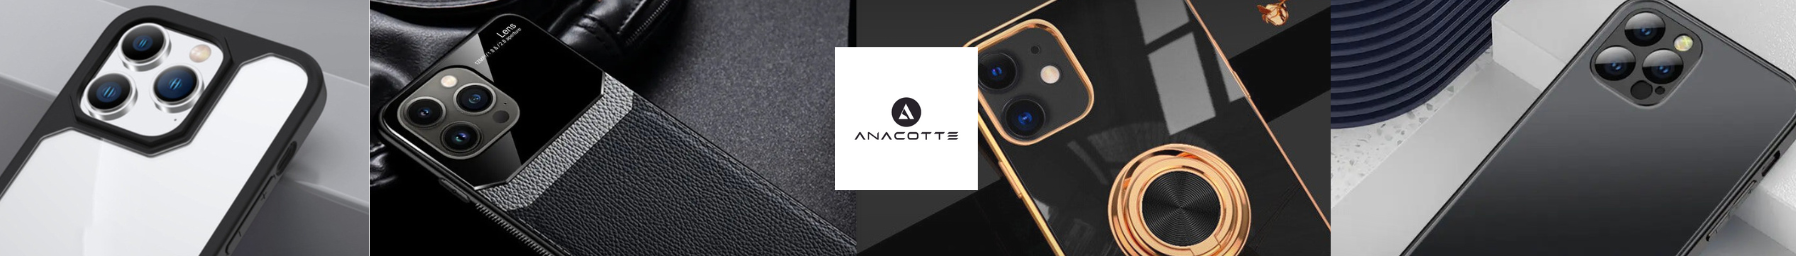 Anacotte LLC - New supplier on Syncee Marketplace